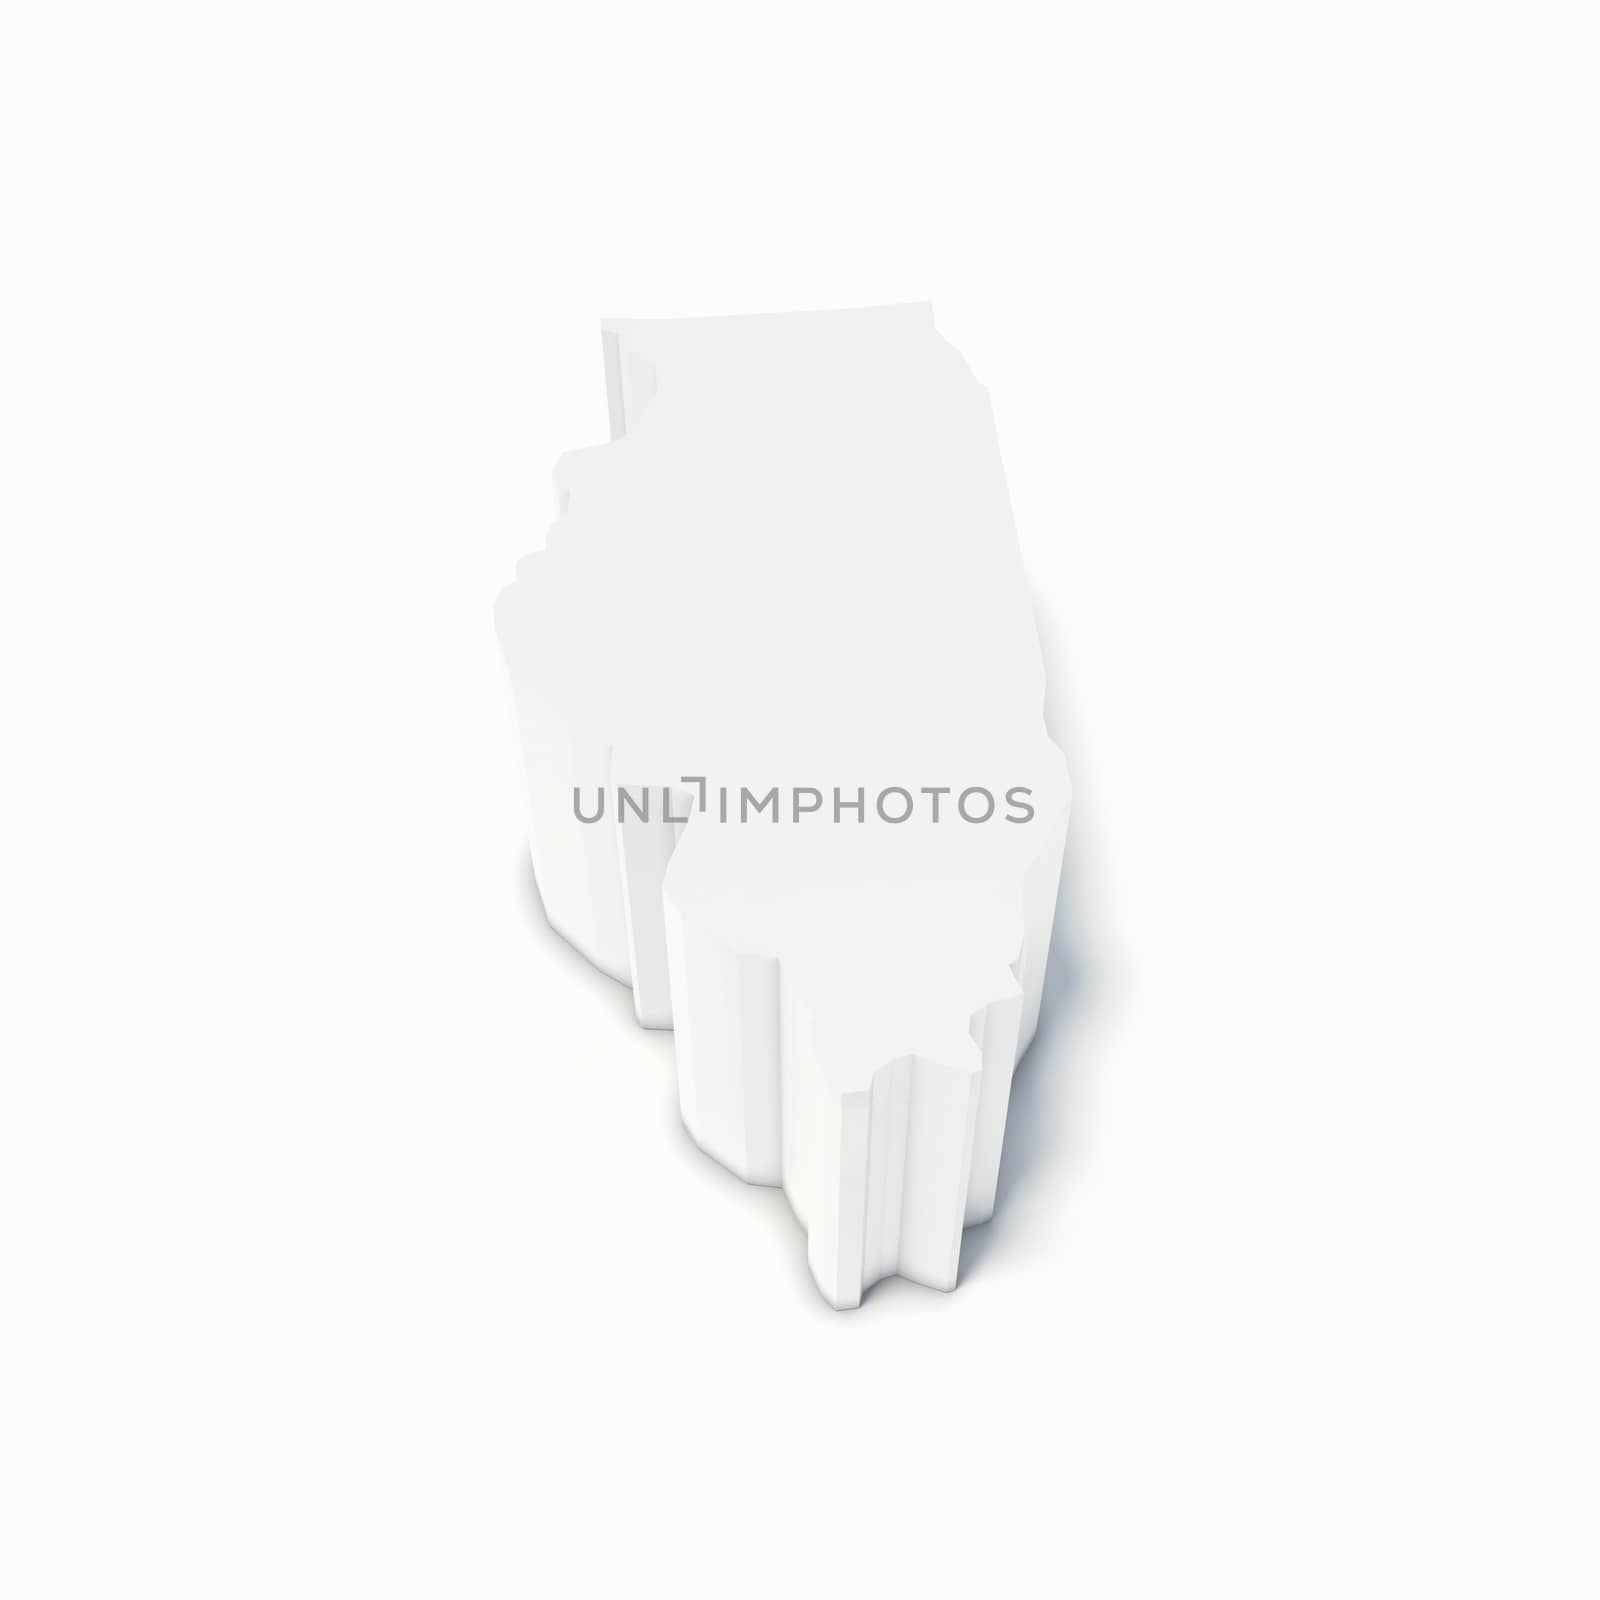 map of illinois in perspective and white